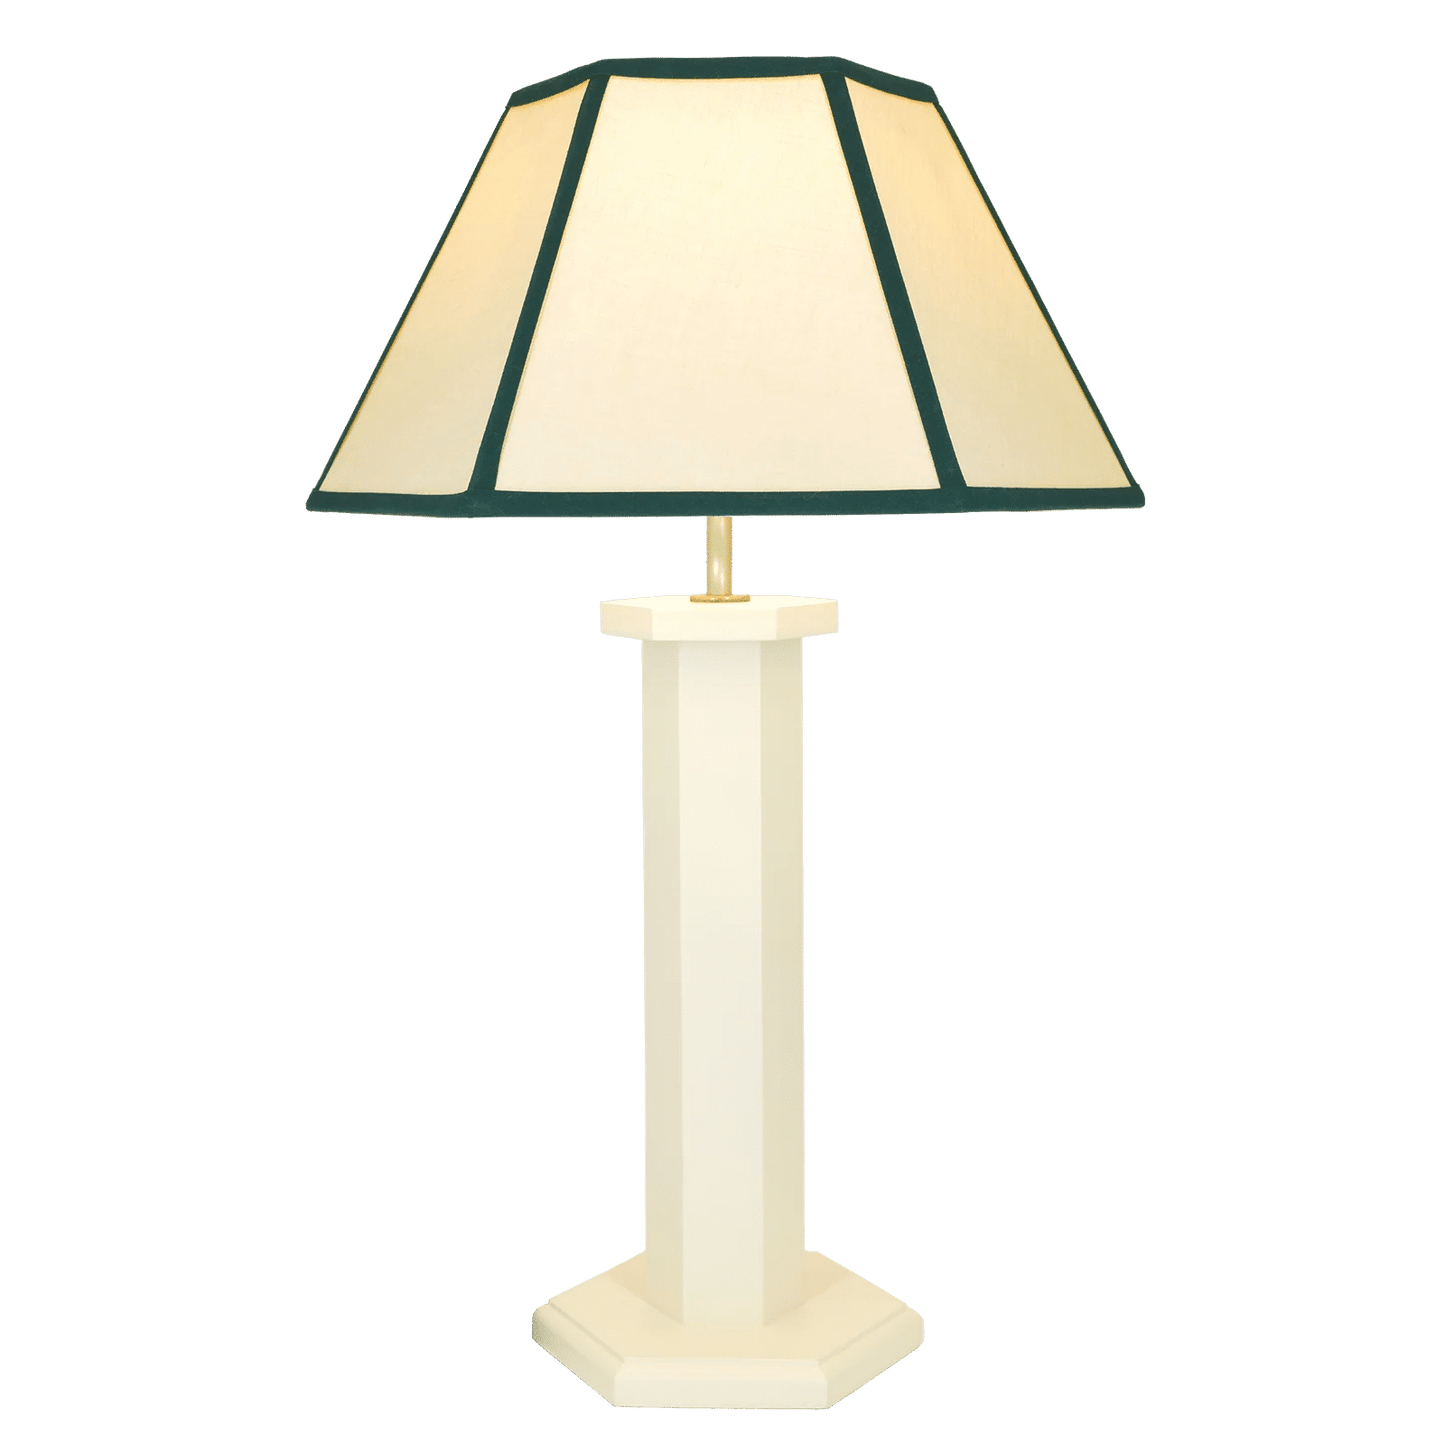 Hexagon Table Lamp - Oyster White